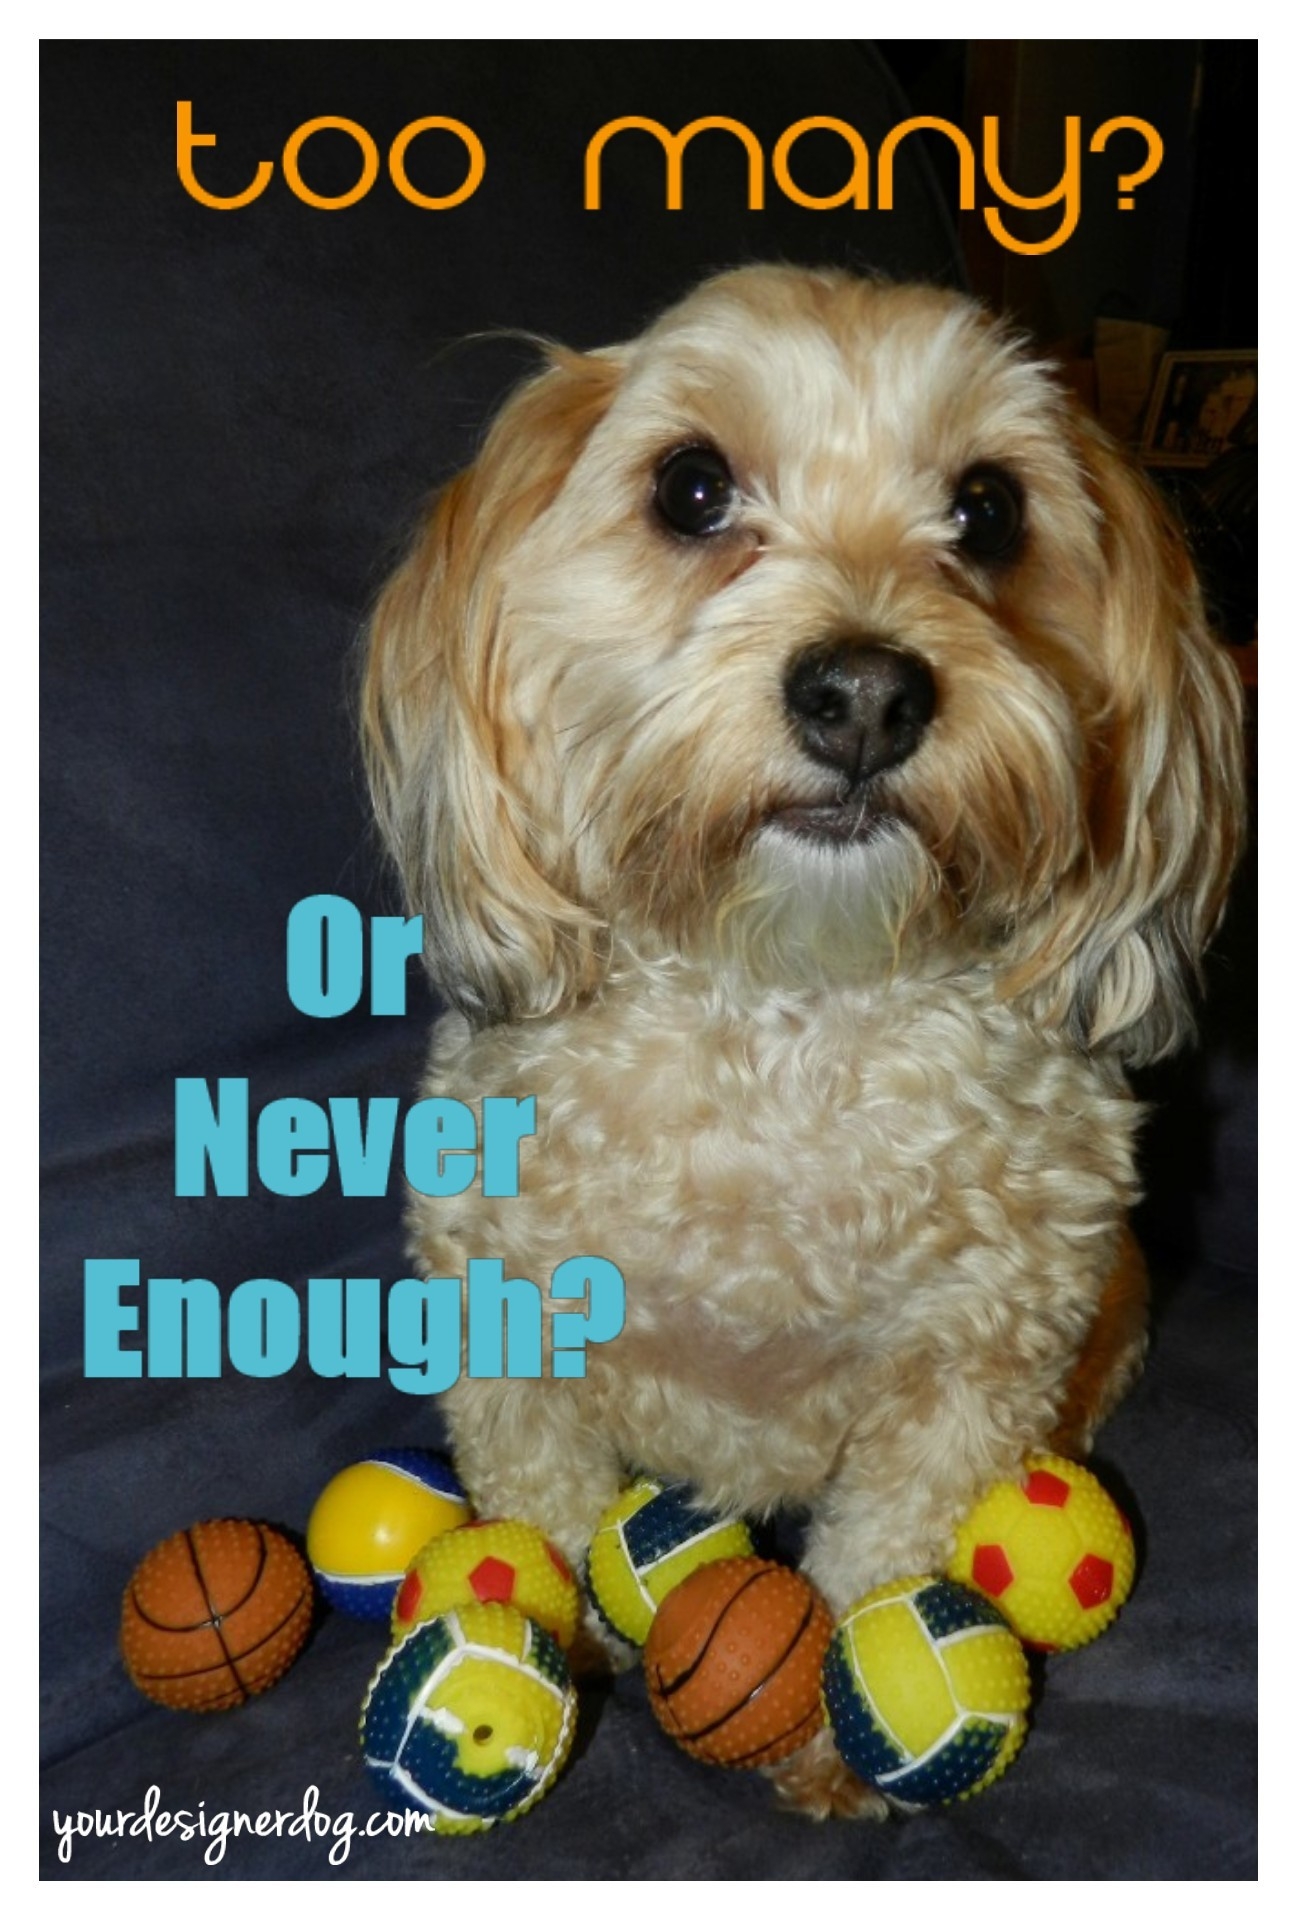 dogs, designer dogs, yorkipoo, yorkie poo, dog toys, squeaky balls